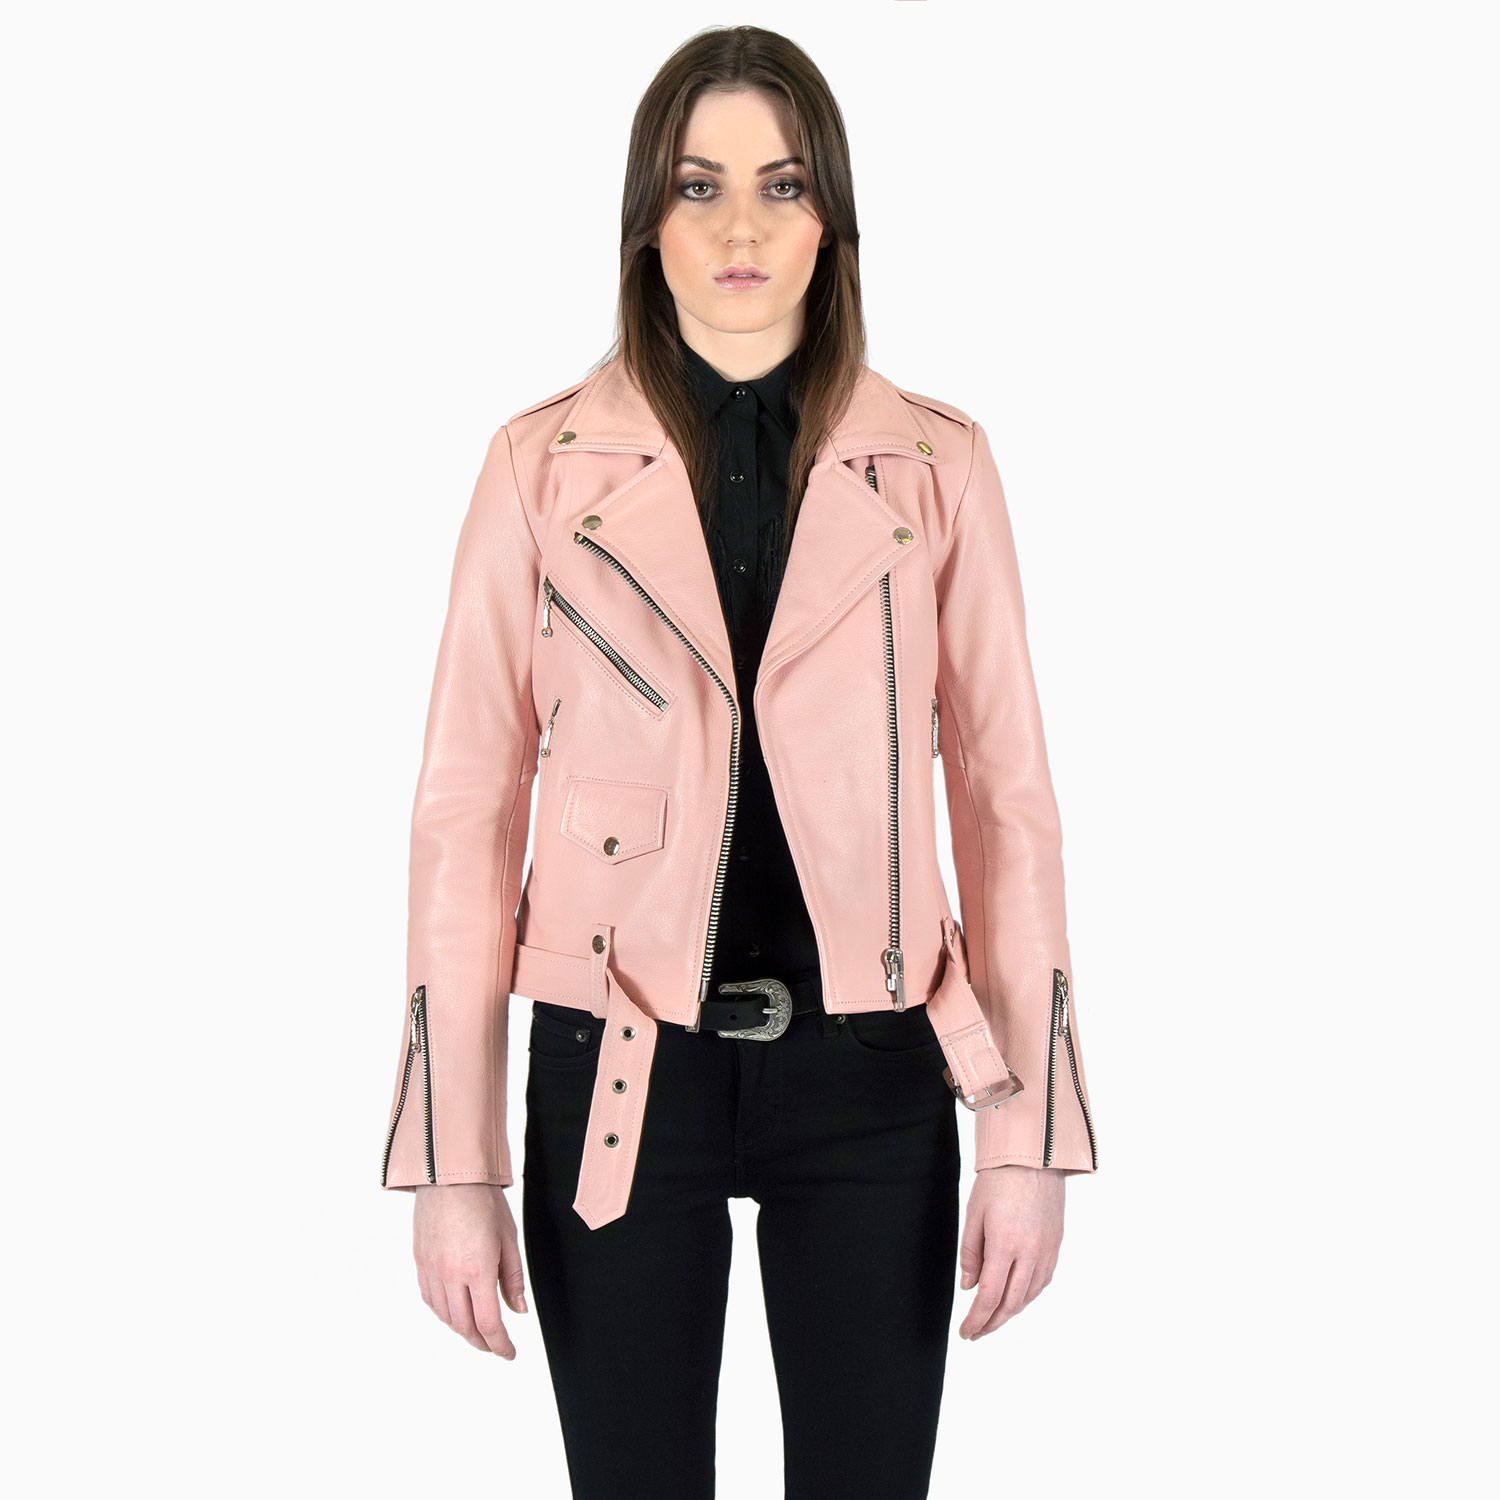 Jacket Apparel S, Dusty | (Size To - 4XL) Pink M, 3XL, Hell 2XL, Commando L, Leather Straight XL, XS,